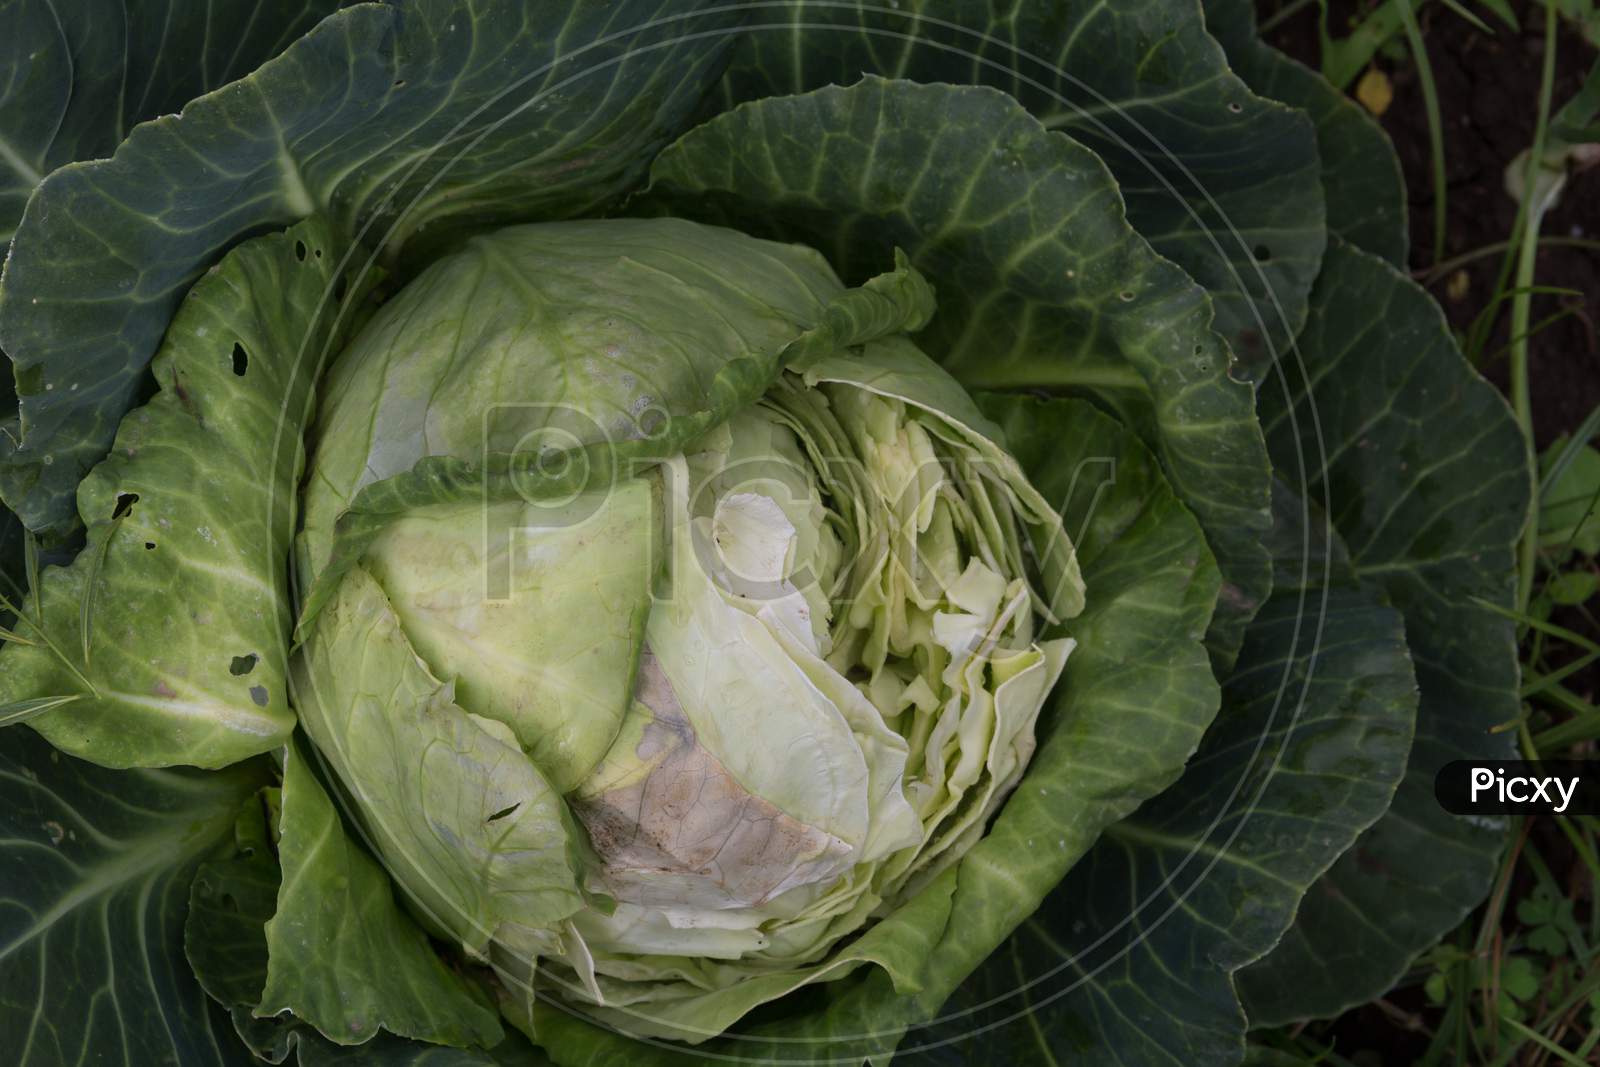 A Cabbage Eaten By Wild Rodents In The Organic Garden